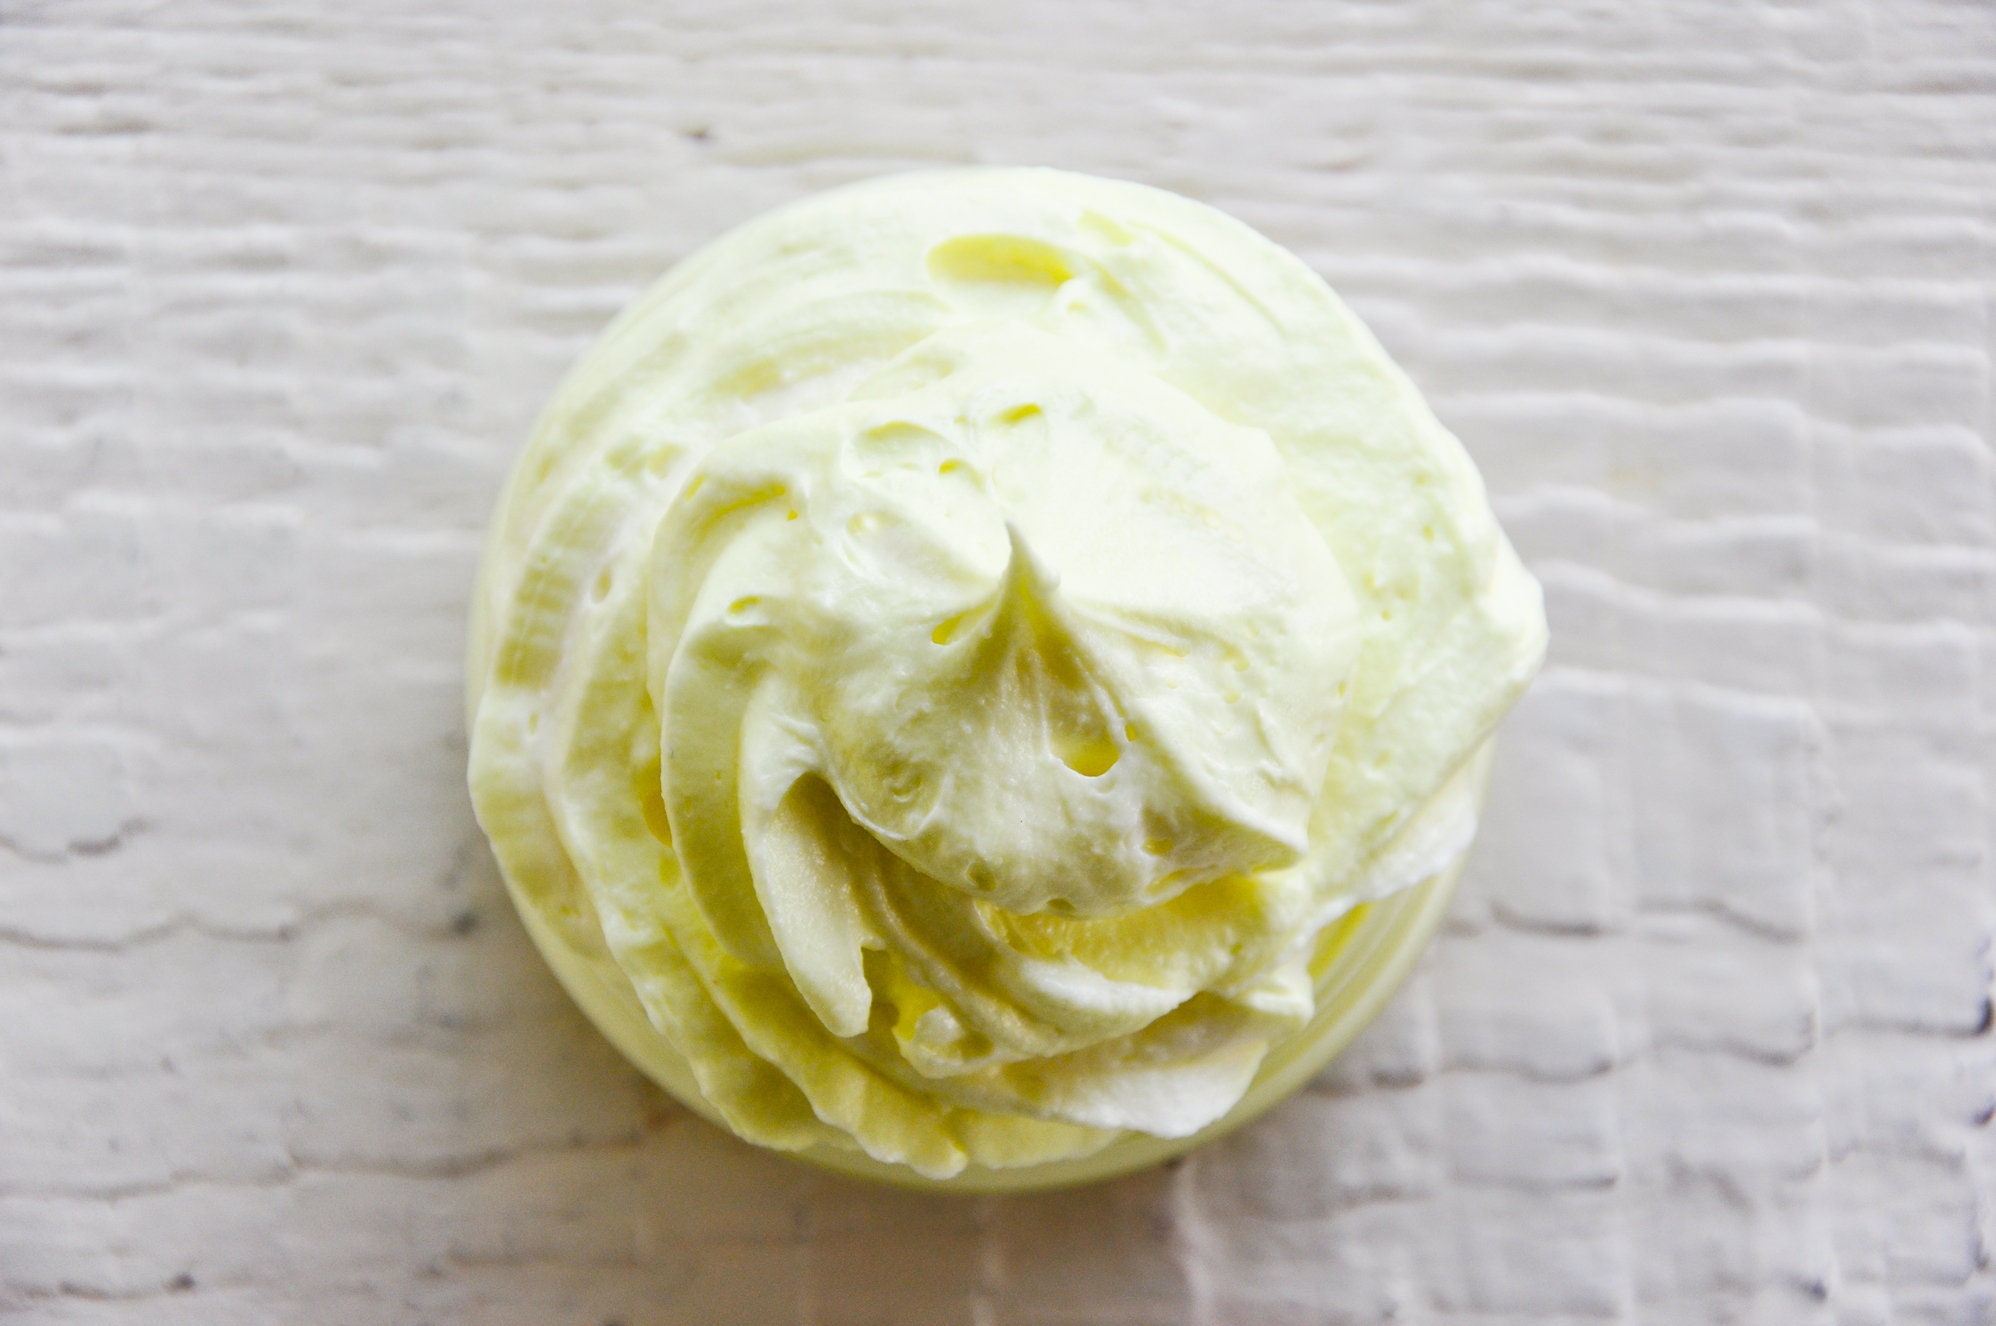 5 KG - Luxe Lather Whipped- Foaming Bath Butter Whip Soap Base (DIY Whipped  Soap, Body Scrub) GREEN HERBOLOGY